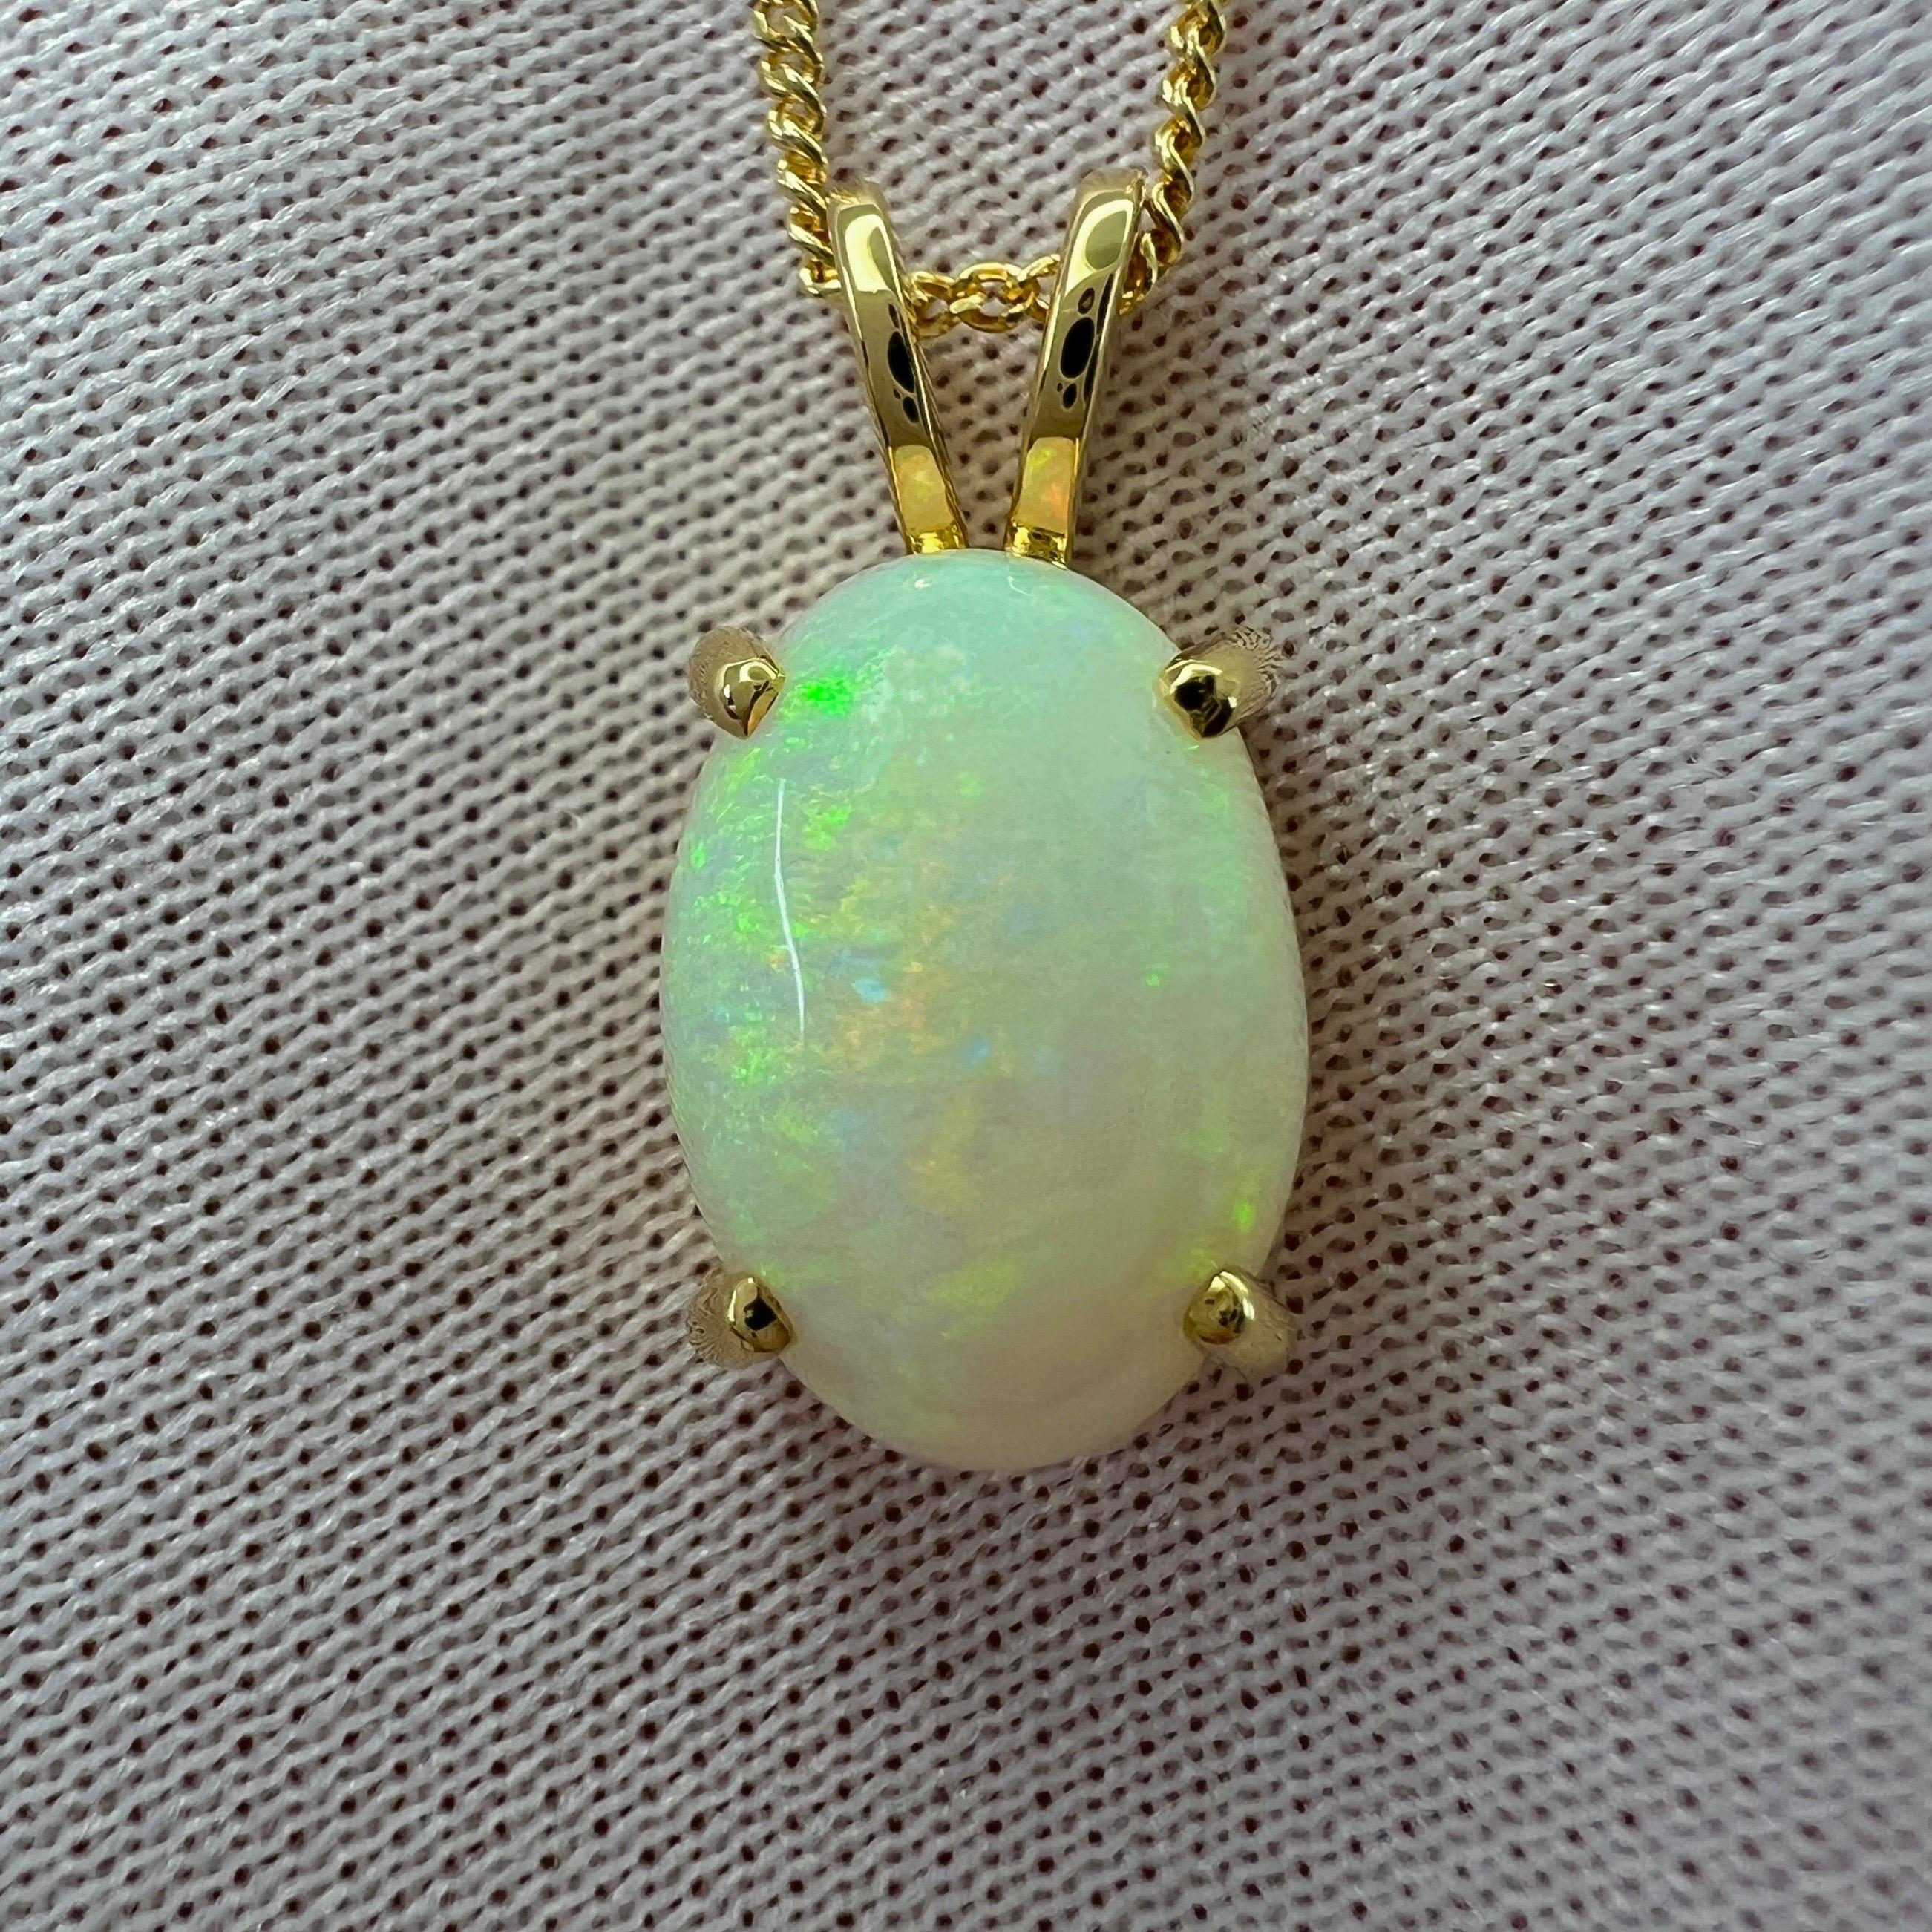 Natural Australian Cooper Pedy White Opal 18k Yellow Gold Solitaire Pendant Necklace.

3.00 Carat opal with beautiful play of colour and an excellent oval cabochon cut. Set in a fine 18k yellow gold 4 claw solitaire pendant. Stunning opal with an